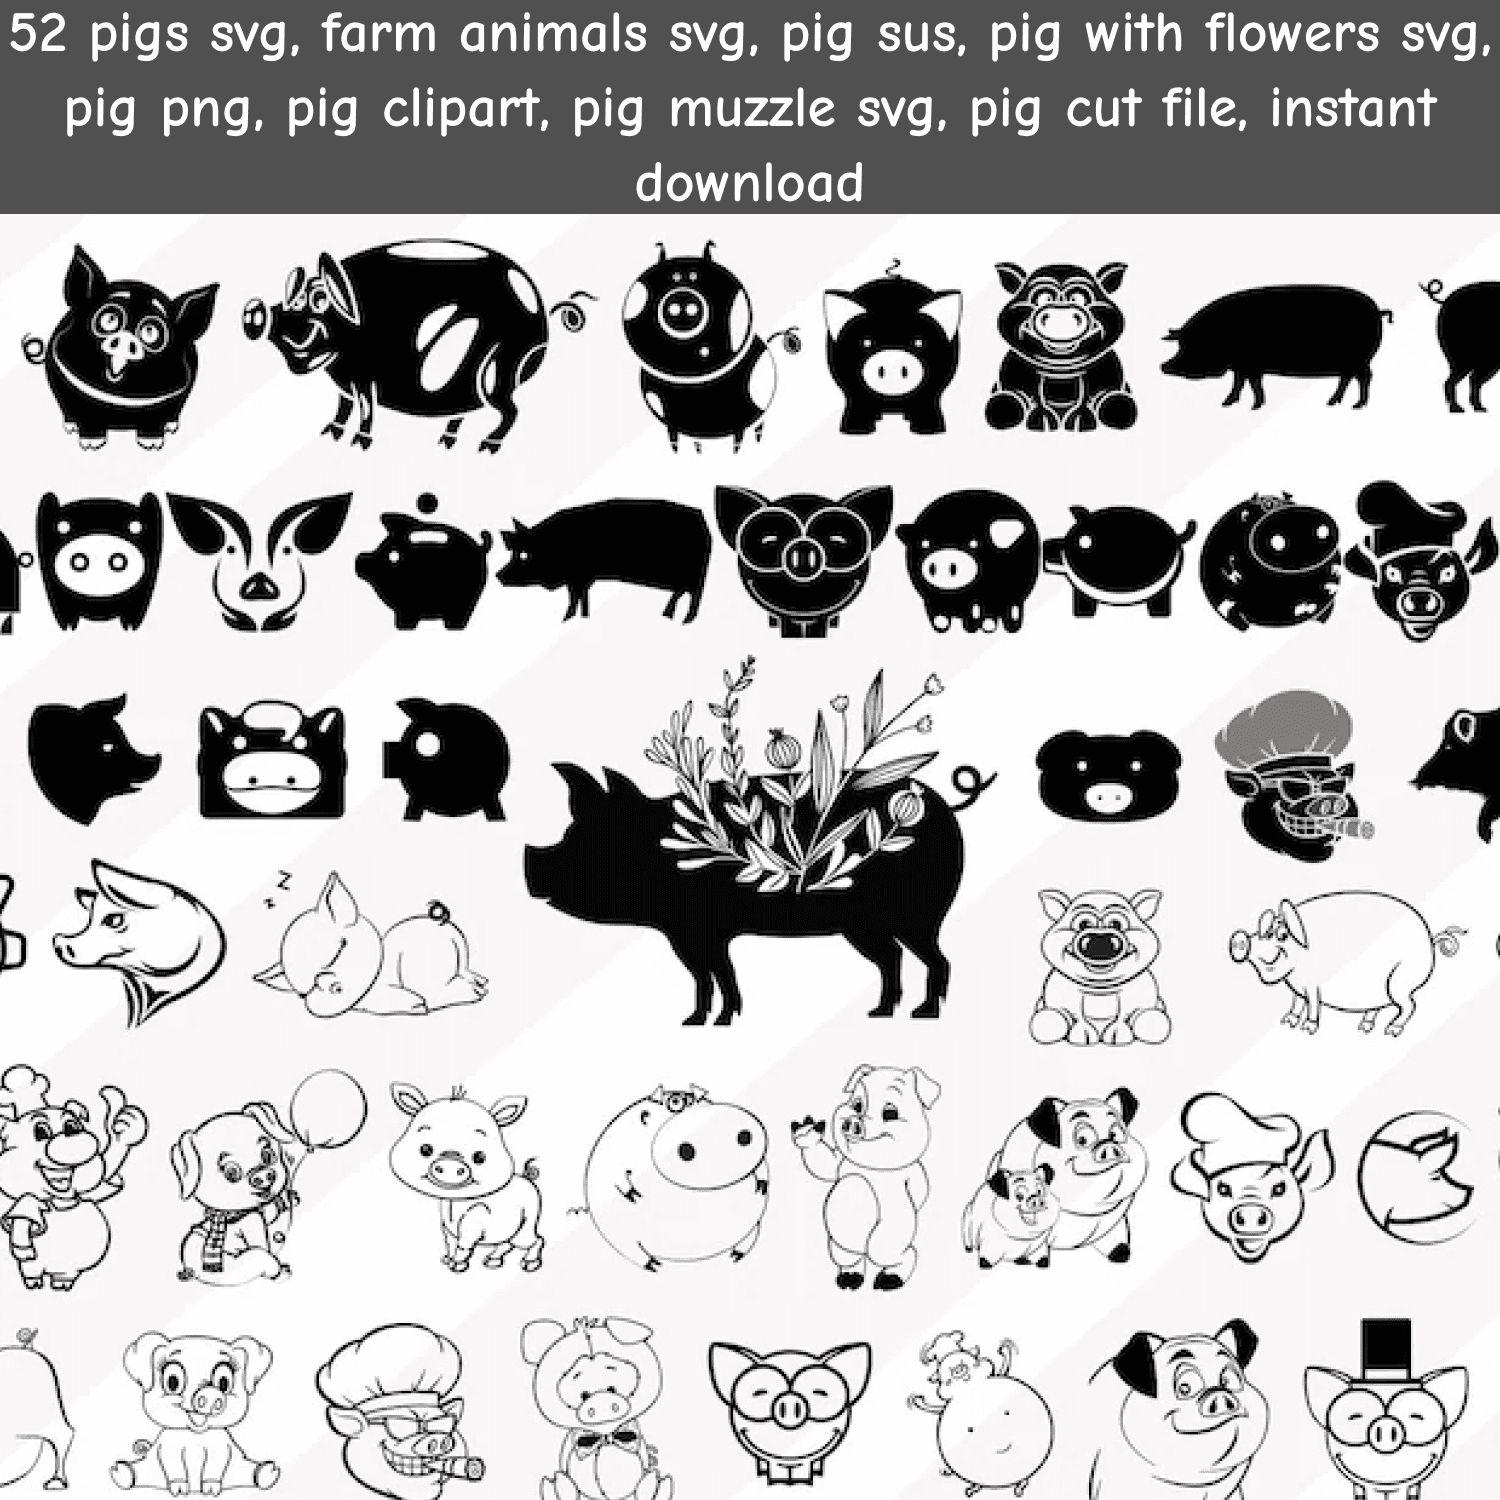 Bunch of farm animals are shown in black and white.